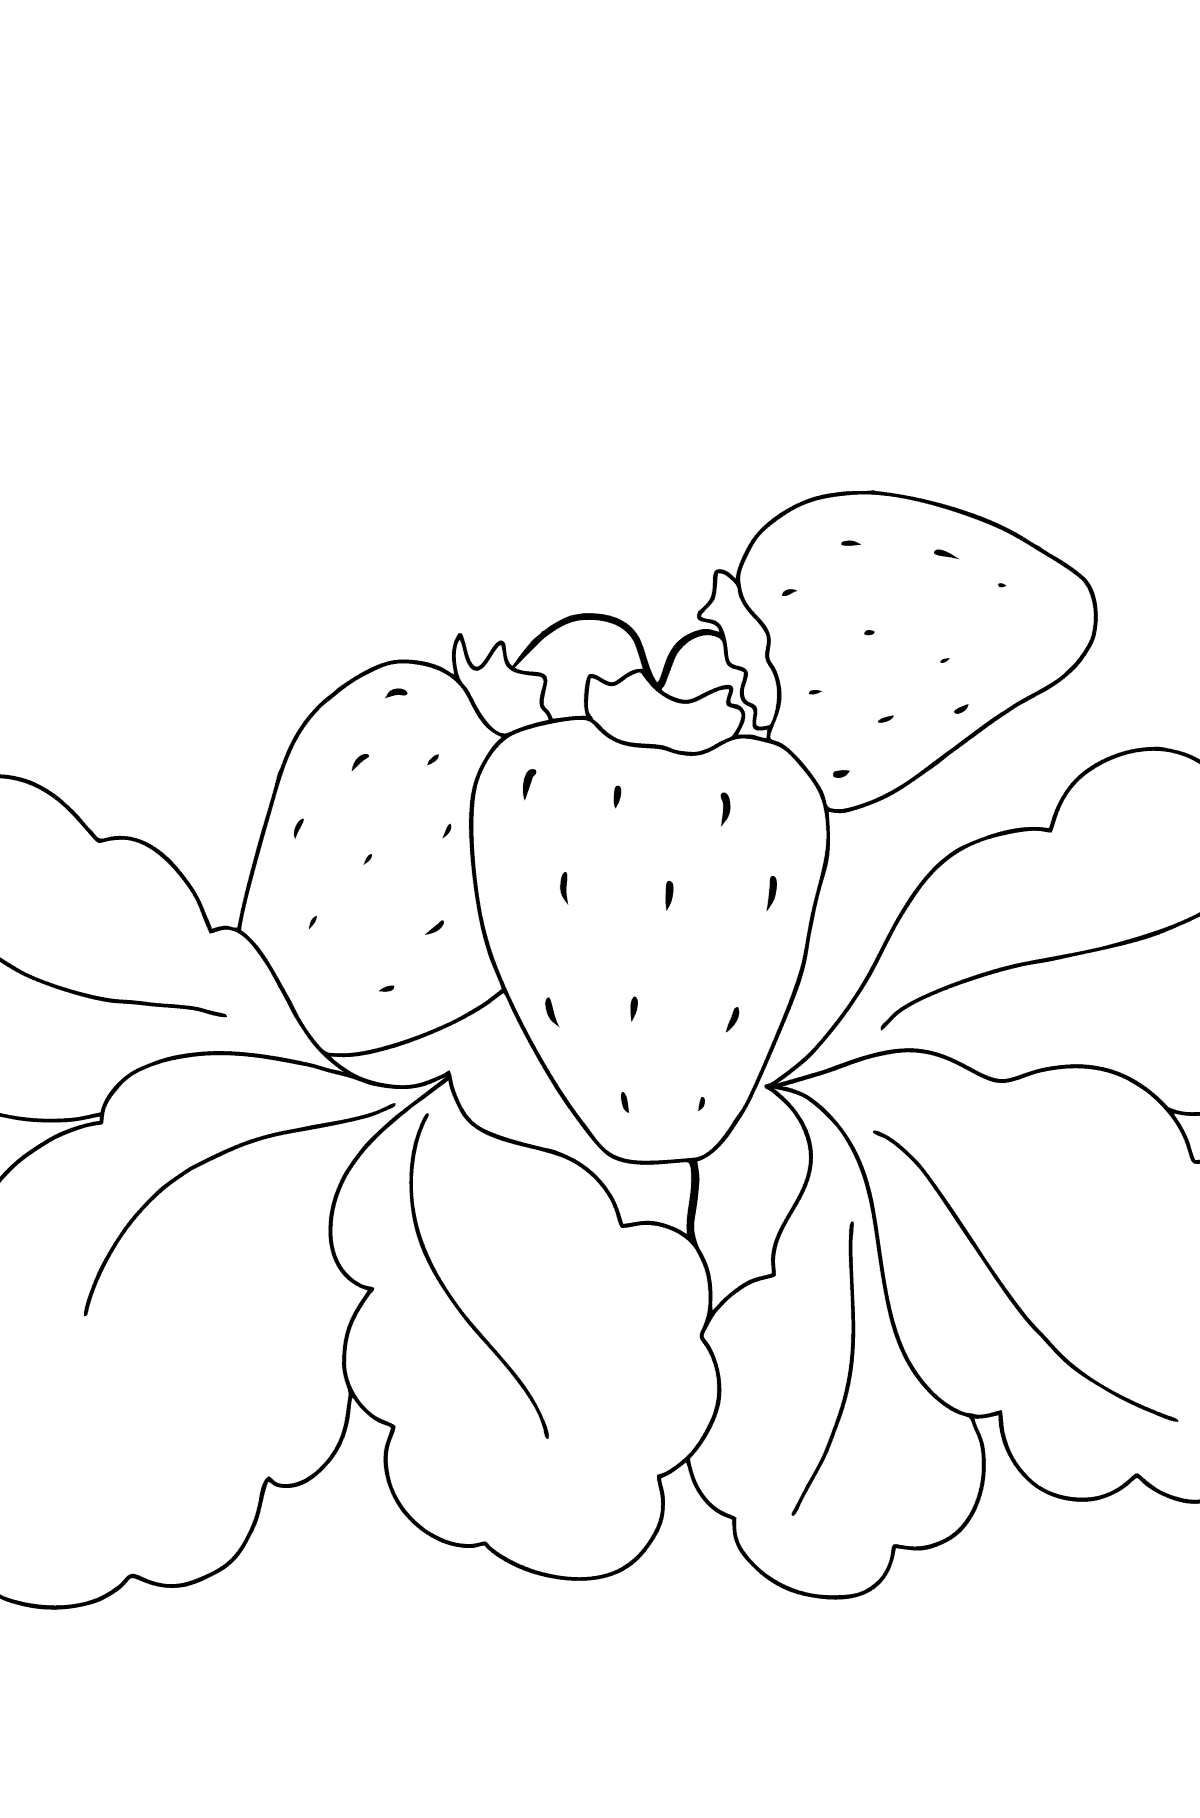 Summer and Strawberry coloring page - Coloring Pages for Kids